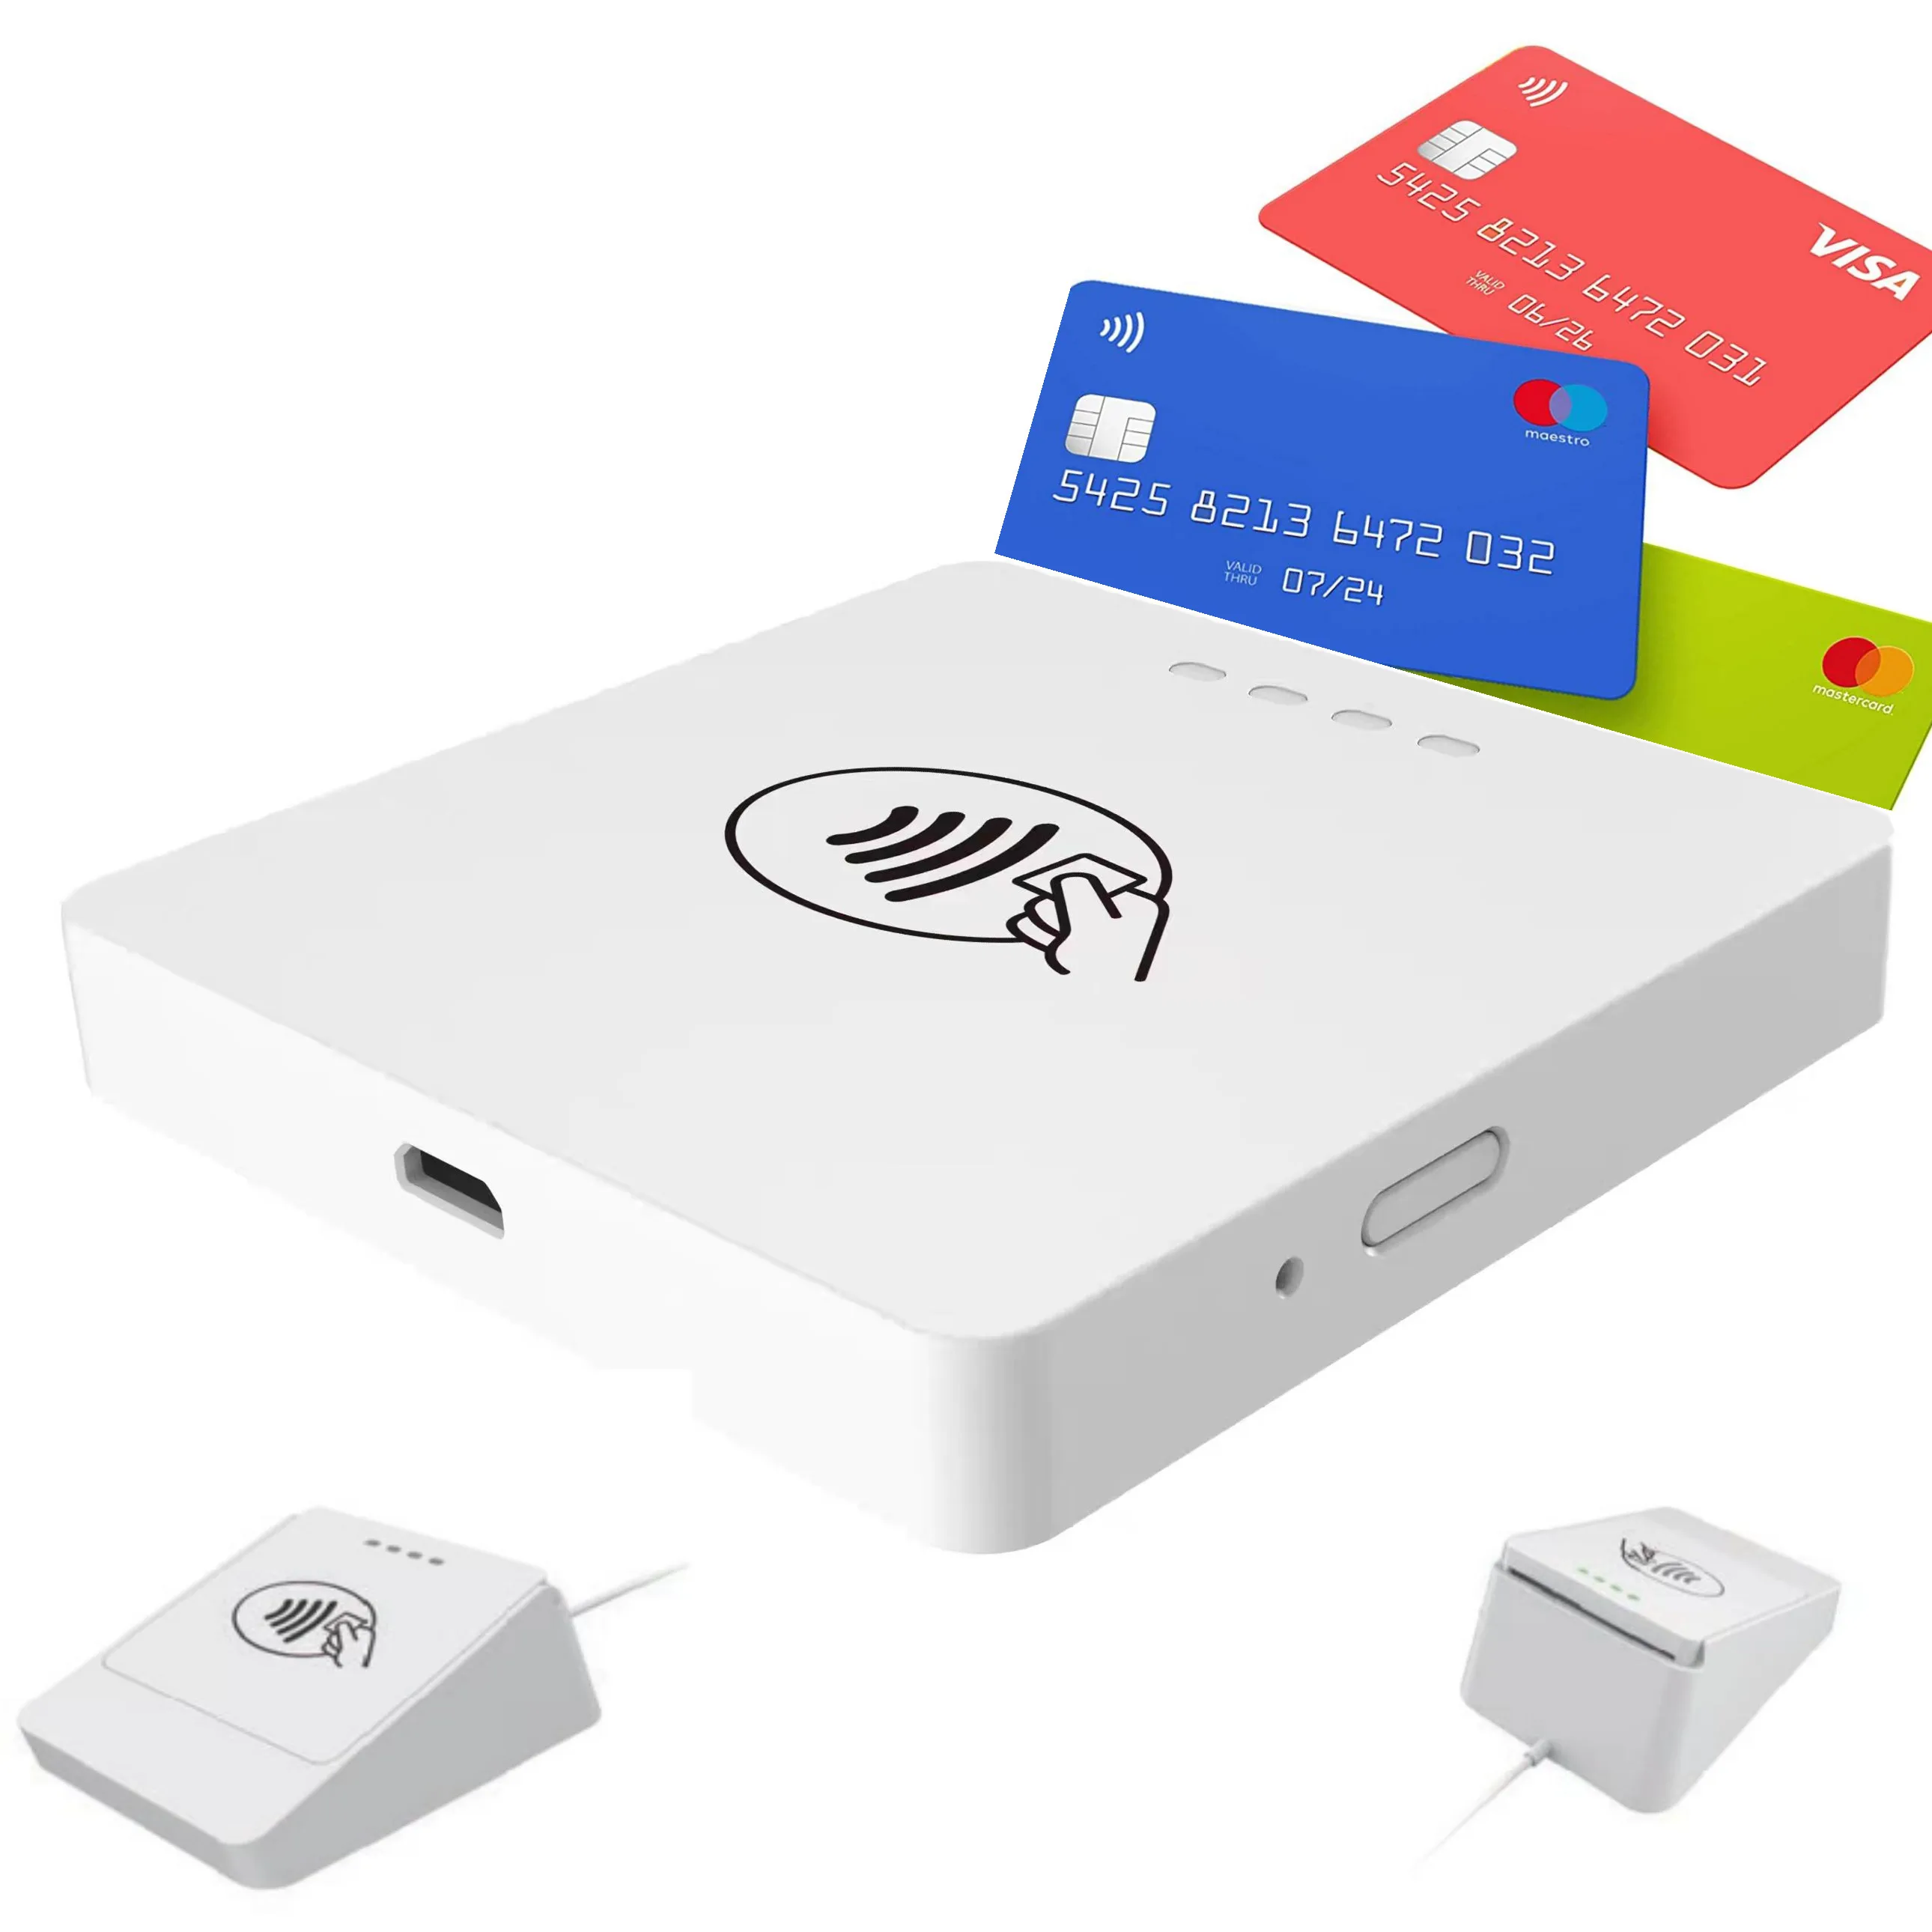 

Smart Square Credit Card Reader For Pos NFC EMV FOR Visa MasterCard American Express IOS ANDROID WINDOWS Certificates